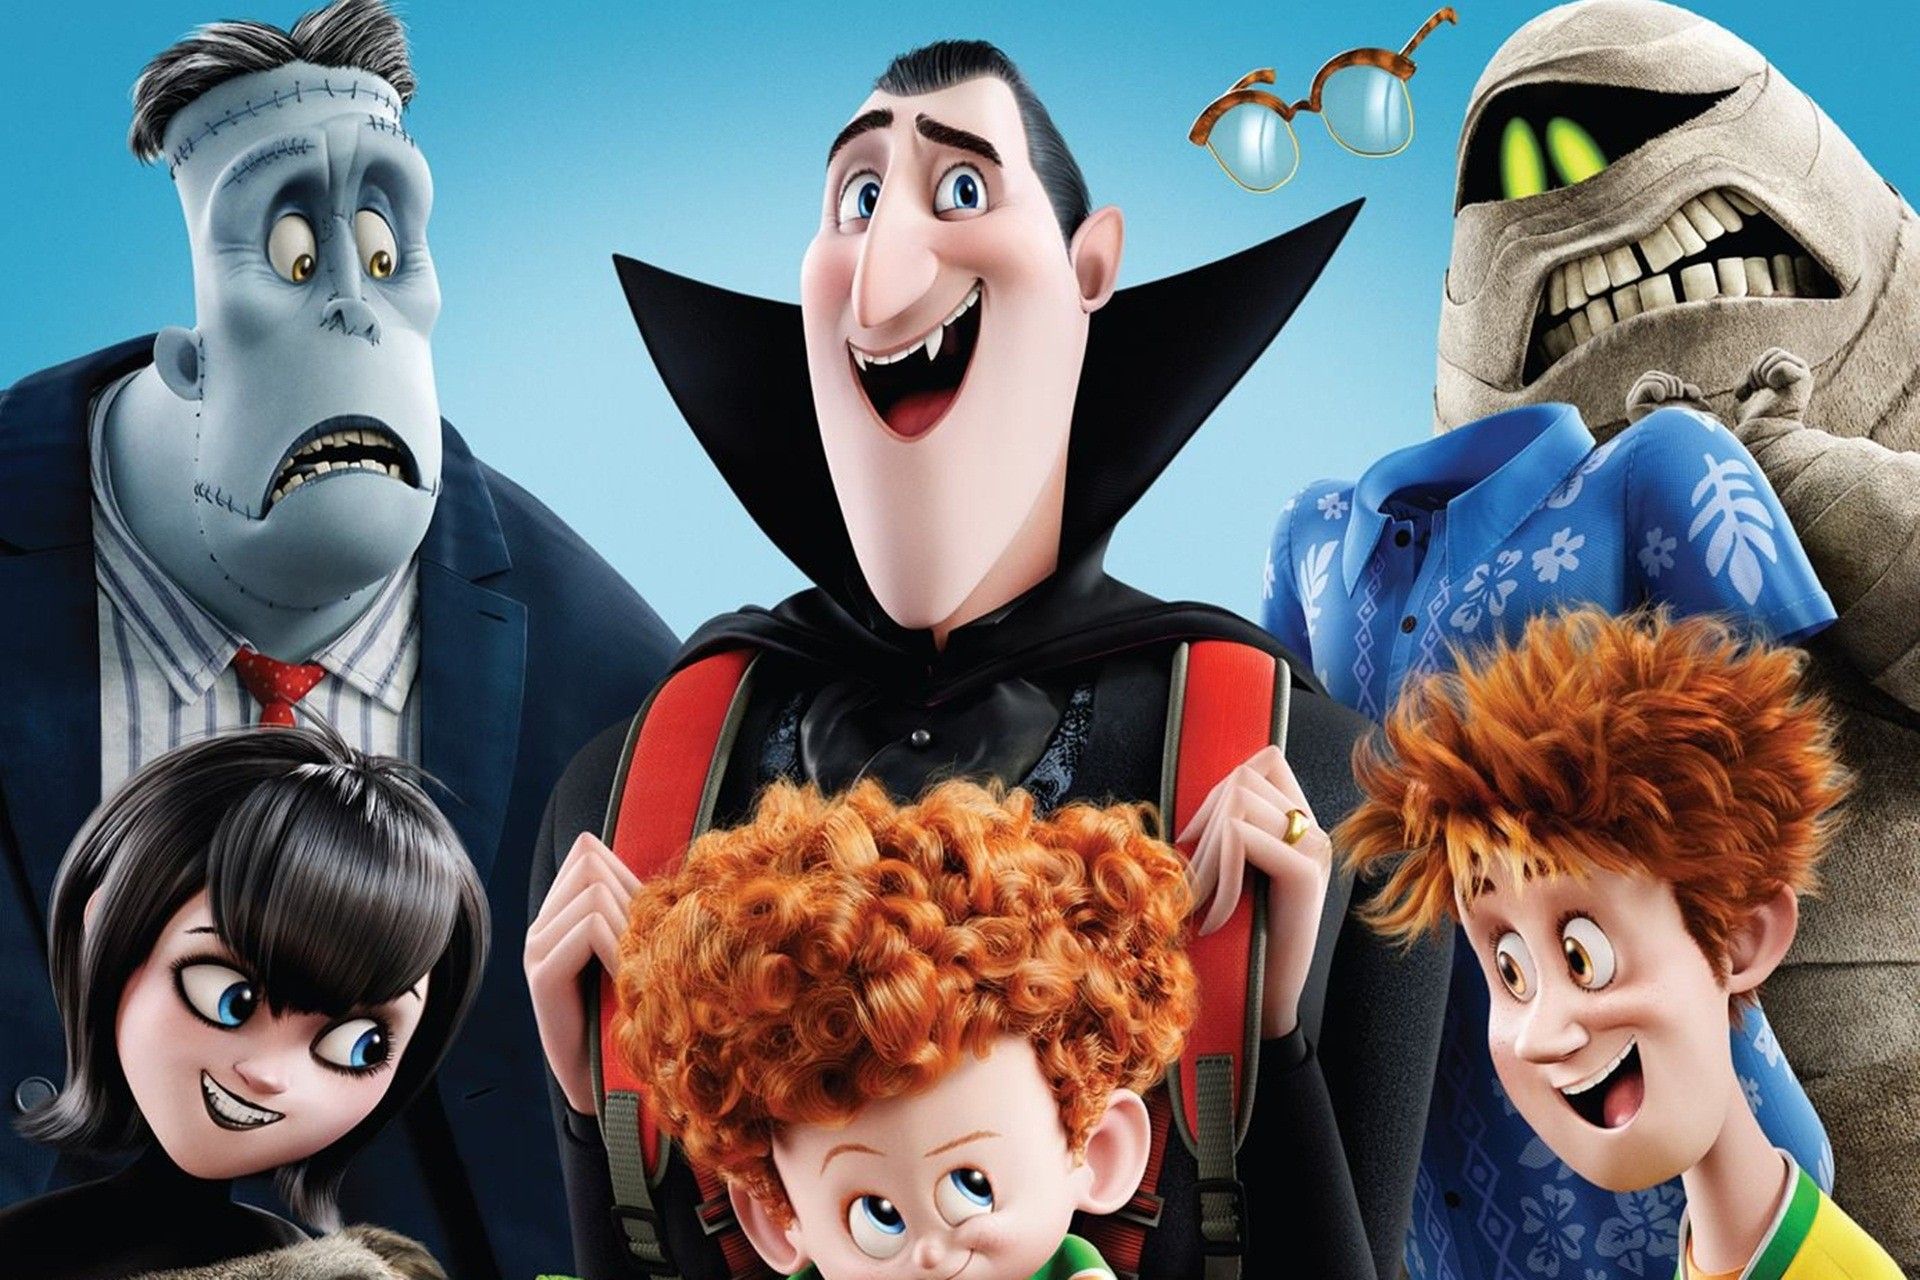 Hotel Transylvania Movie Wallpapers Archives - HDWallSource.com ...